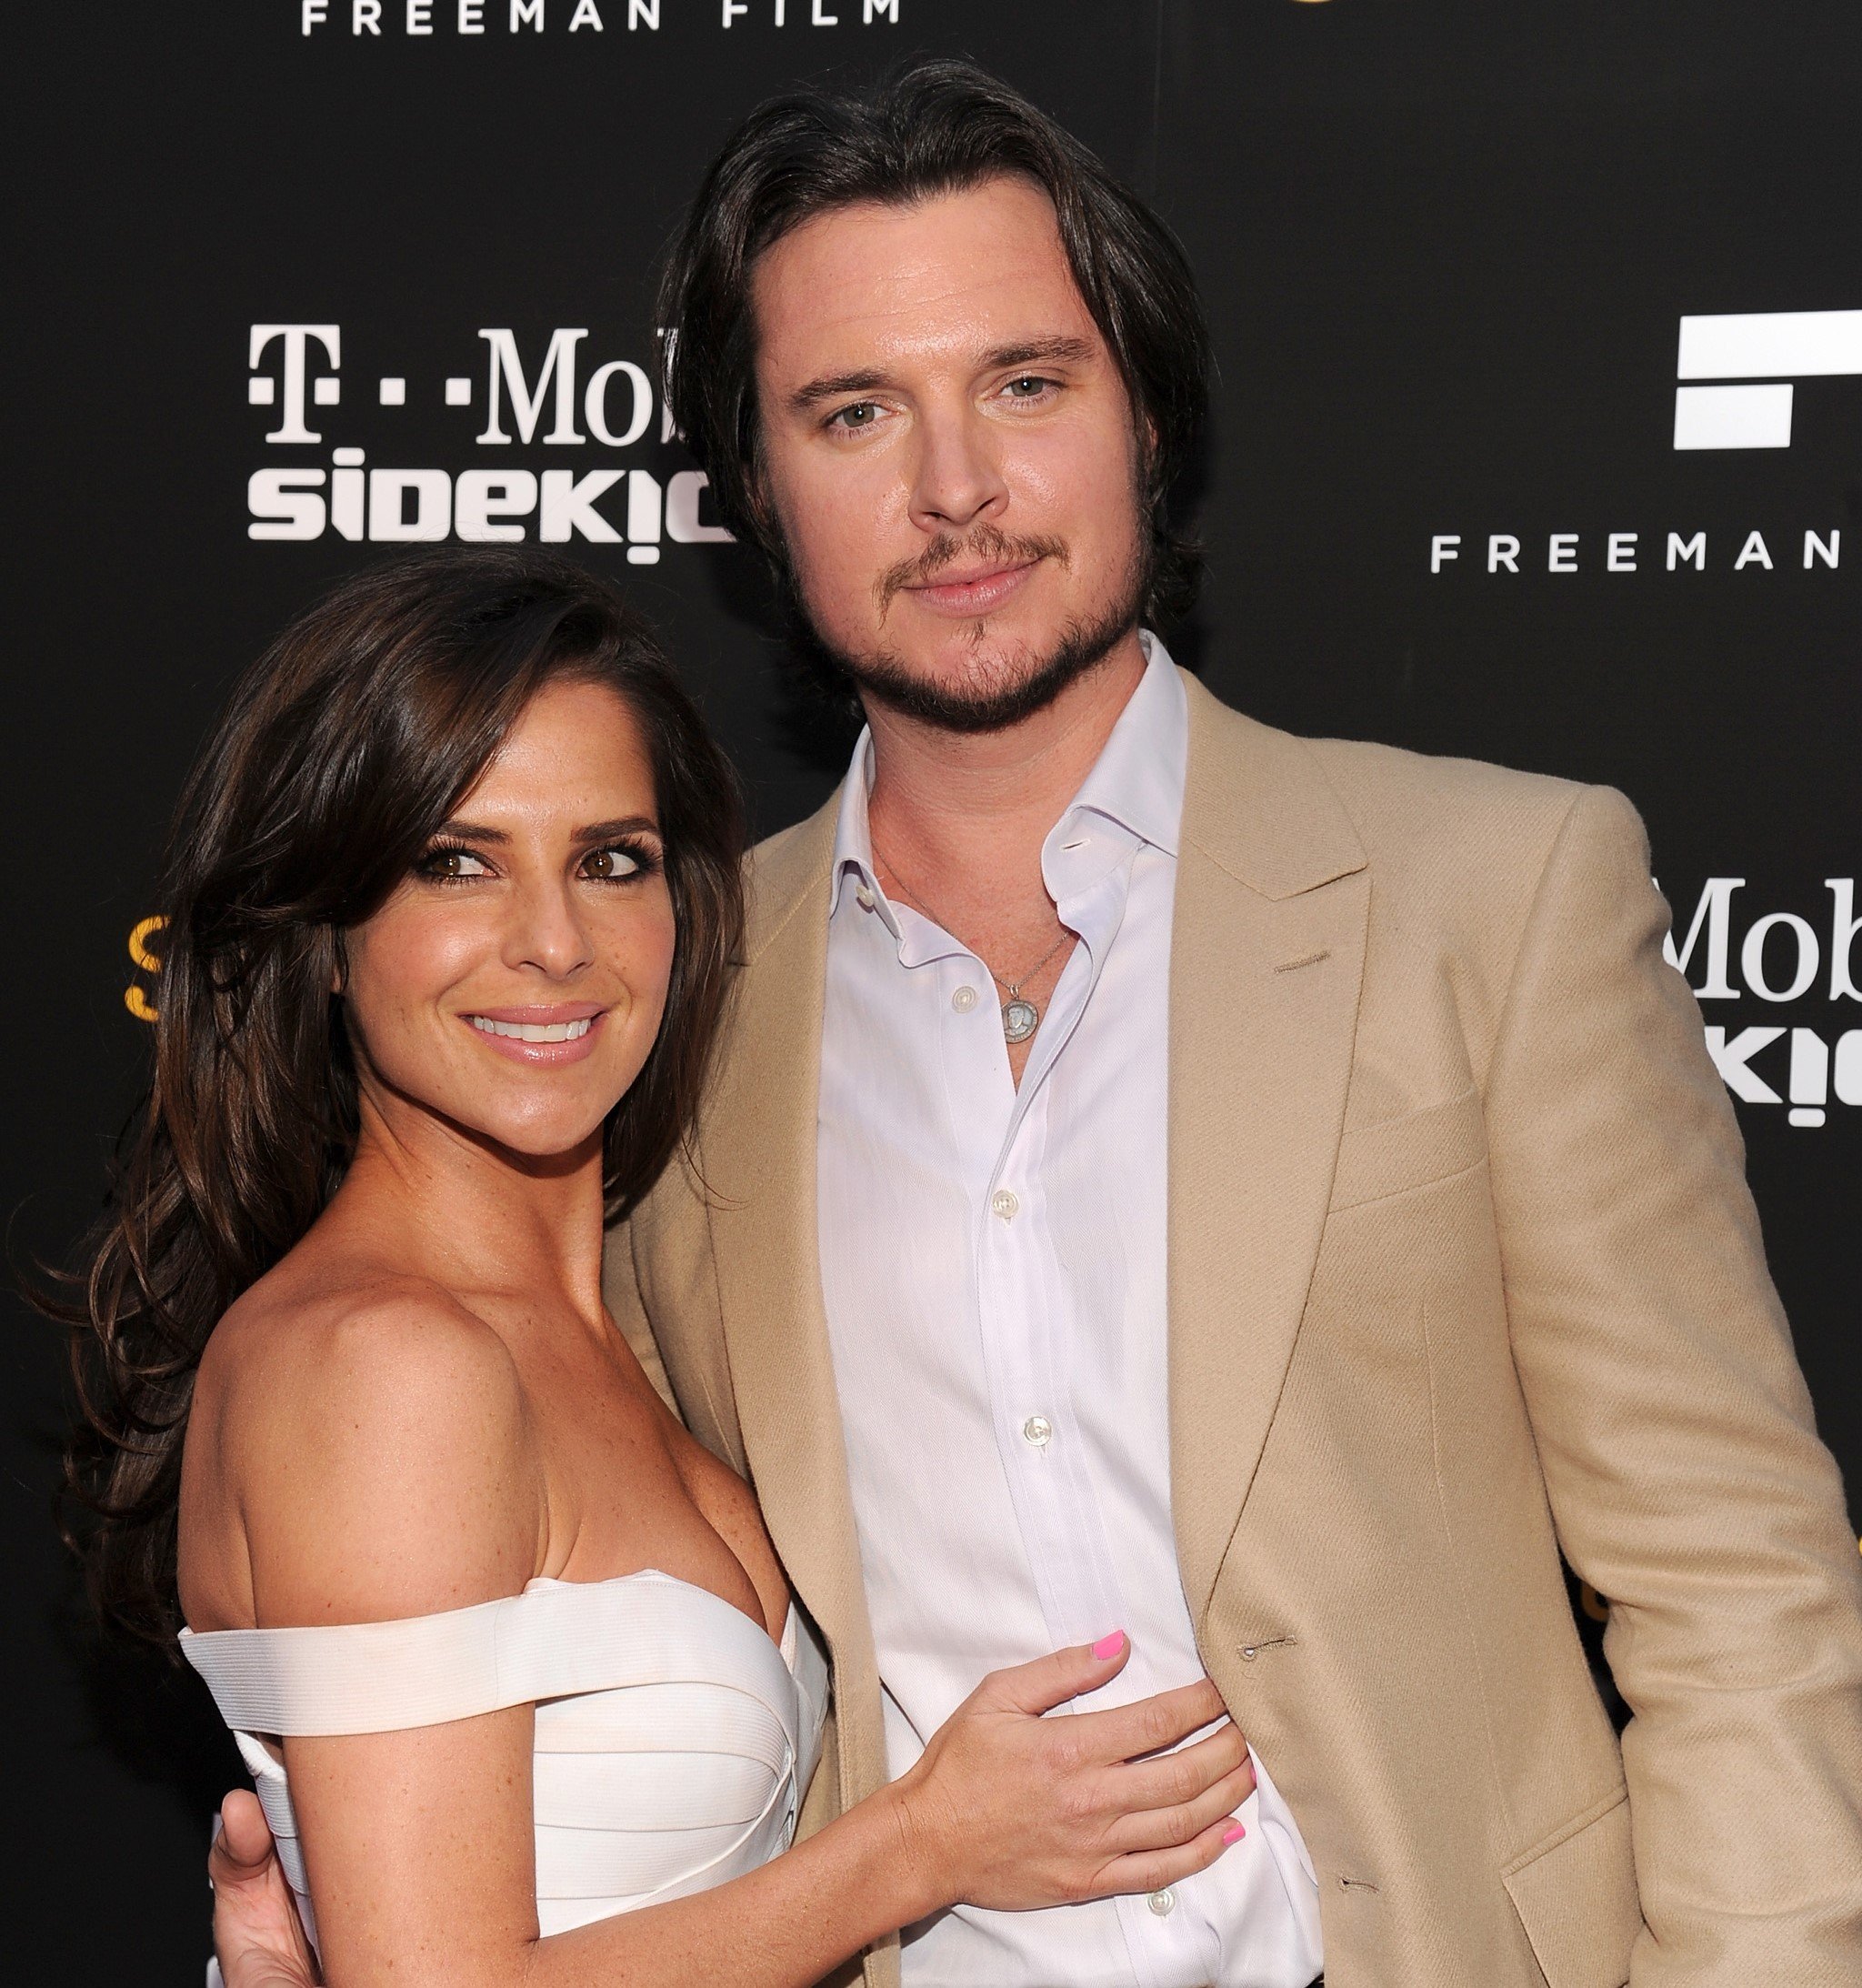 Heath Freeman and Kelly Monaco at the "Skateland" premiere in 2011 in Hollywood. | Source: Getty Images